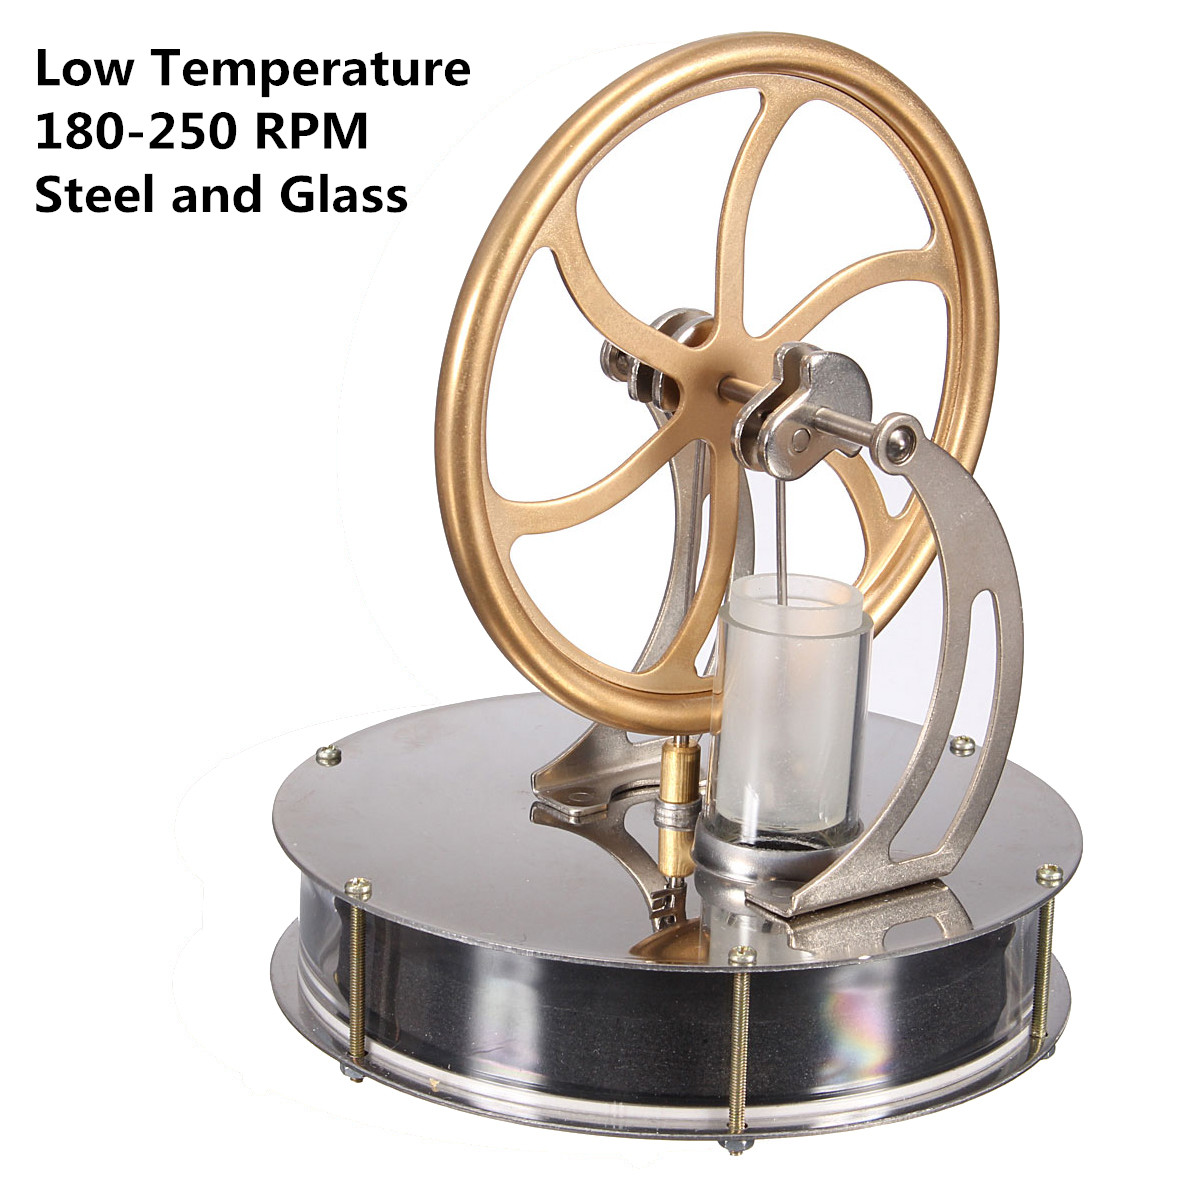 Low-Temperature-Stirling-Engine-Motor-Temperature-Difference-Cool-Model-Educational-Toy-1164414-3